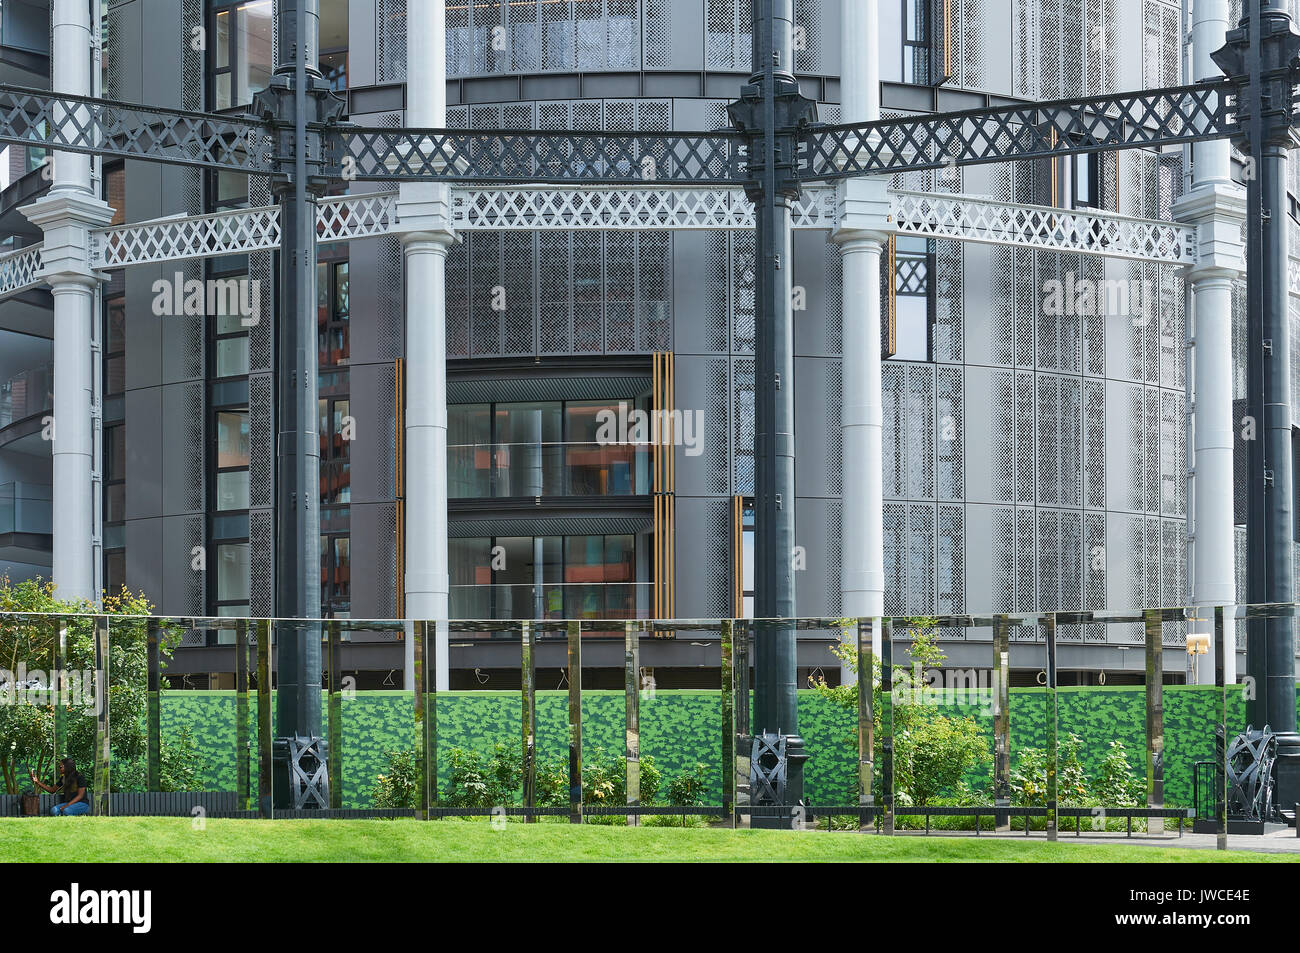 New apartments in converted gasworks at Gasholder Park, King's Cross, London UK Stock Photo